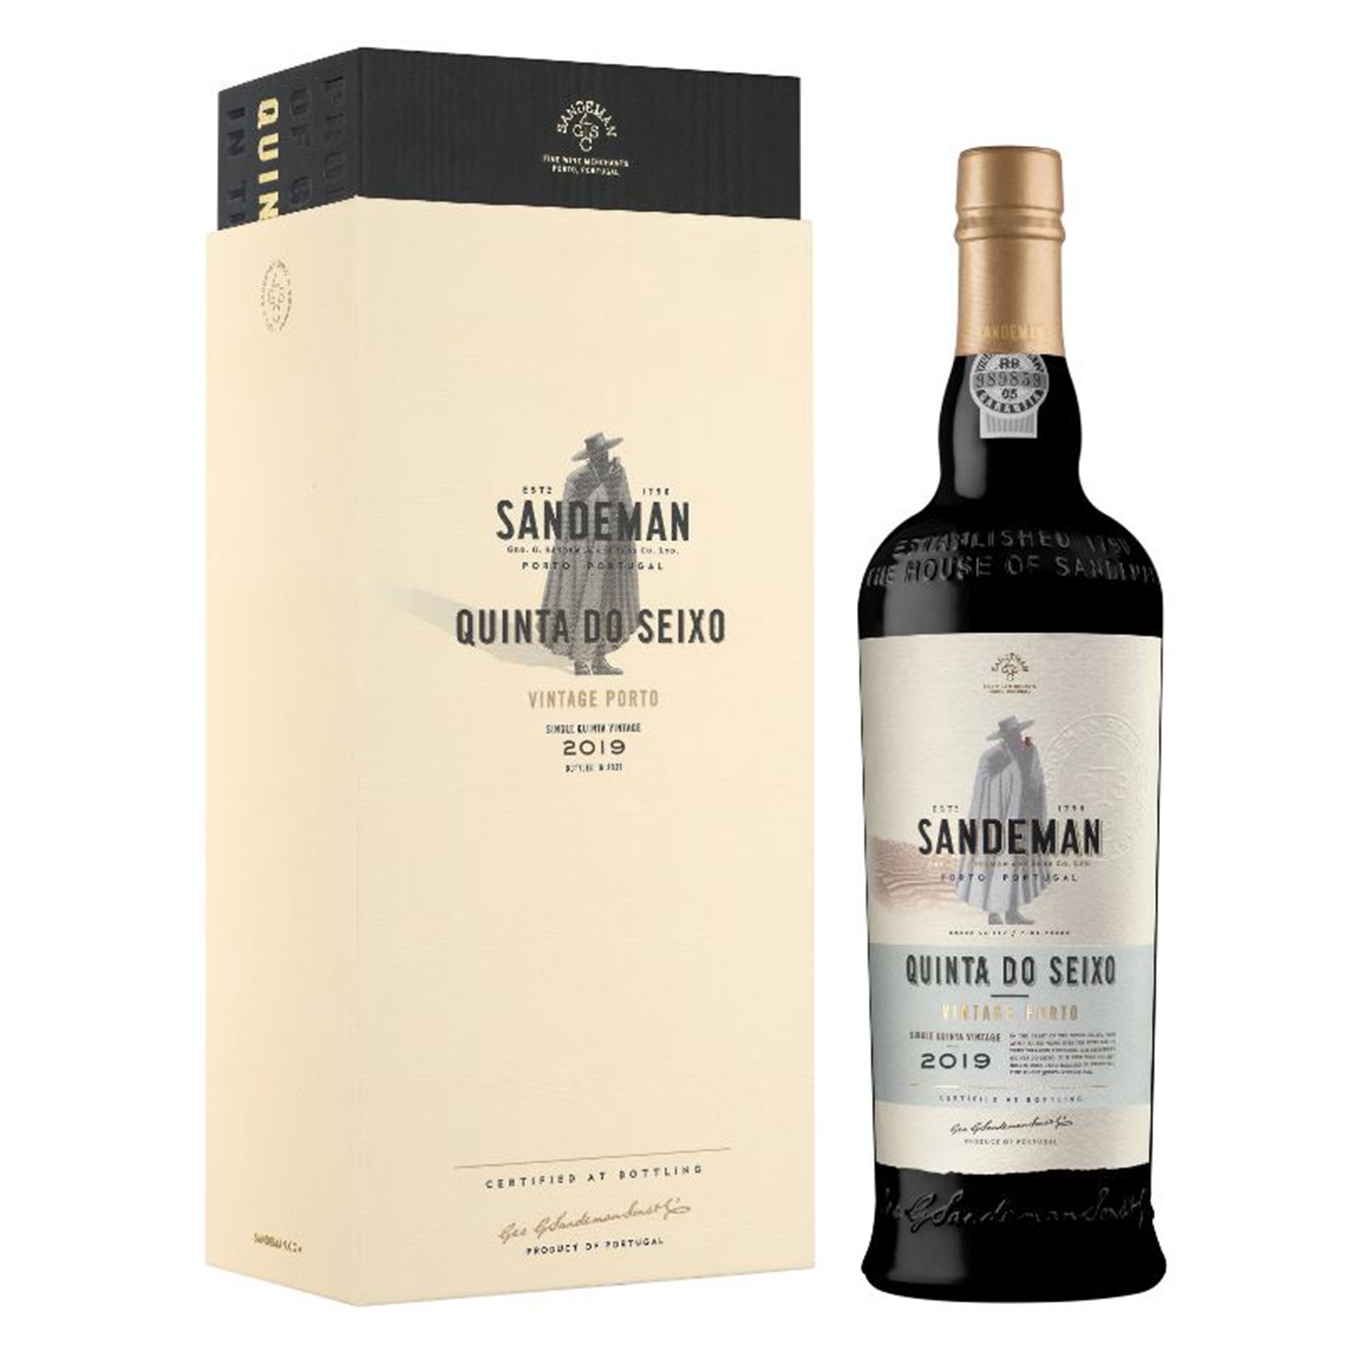 Sandeman Quinta do Seixo Vintage Port 2019 Gift Box, Portugal, 750ml Port And Fortified Wine